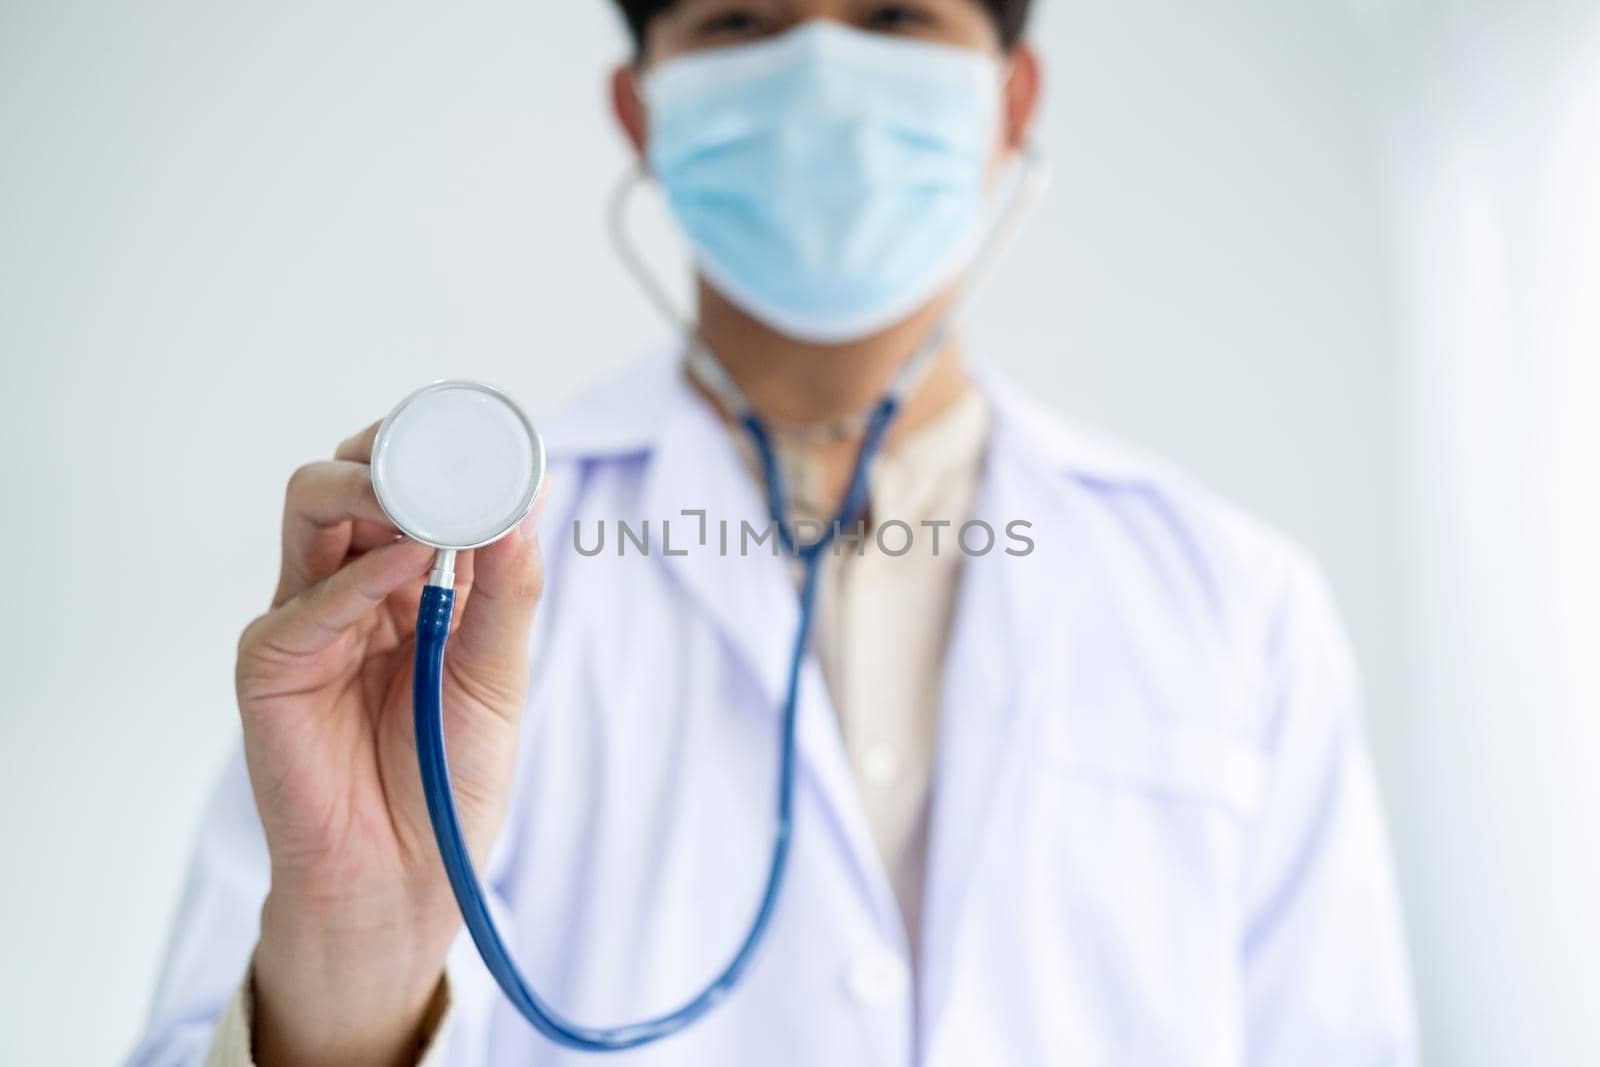 Young man doctor holding stethoscope and medical mask to protect against coronavirus 2019 disease or COVID-19 global outbreak.